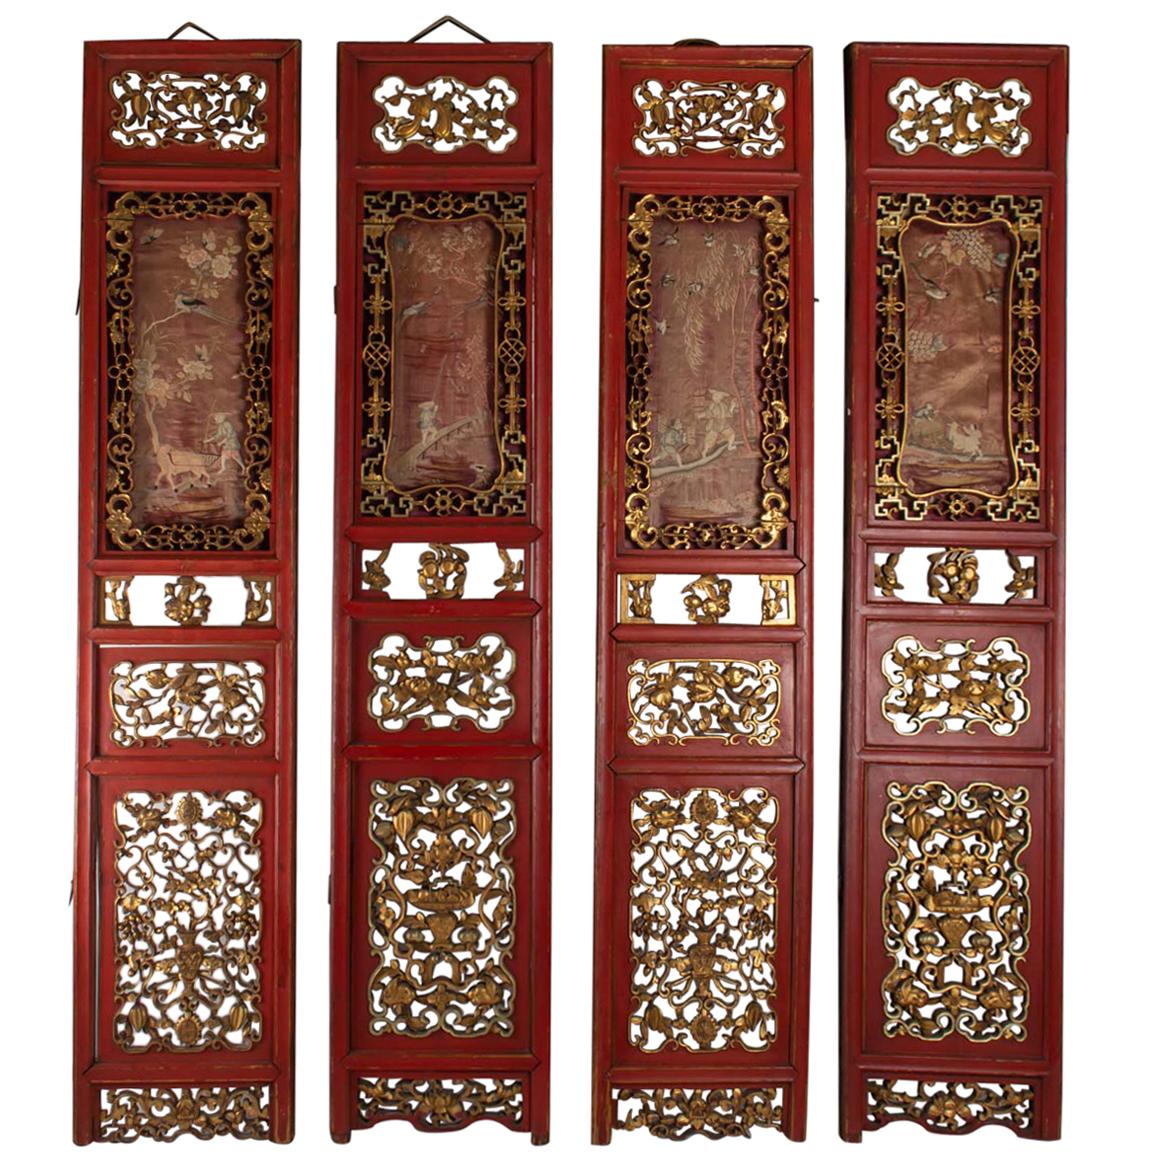 4-Panel Red and Gold in Openwork Wood and Carved Fruit, Flowers and Symbols